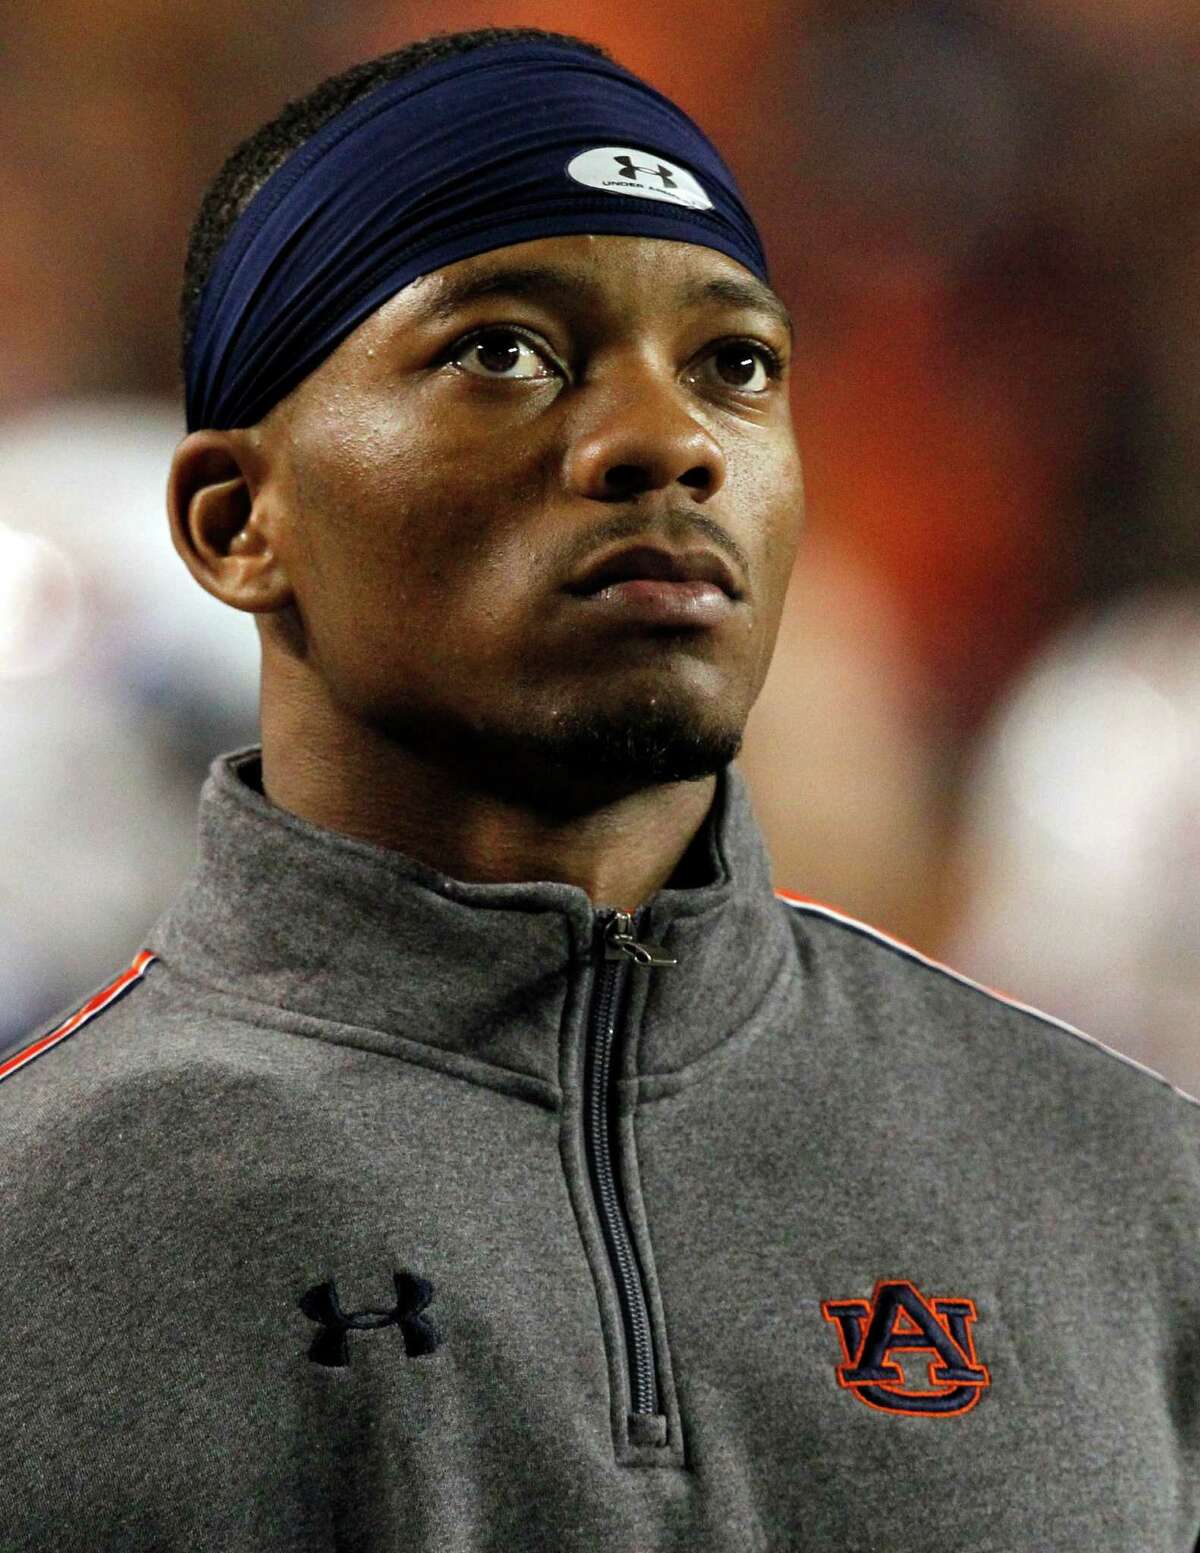 Auburn quarterback Nick Marshall watches from the sidelines out of uniform after suffering an injury during the first half of an NCAA college football game against Florida Atlantic on Saturday, Oct. 26, 2013, in Auburn, Ala. (AP Photo/Butch Dill)